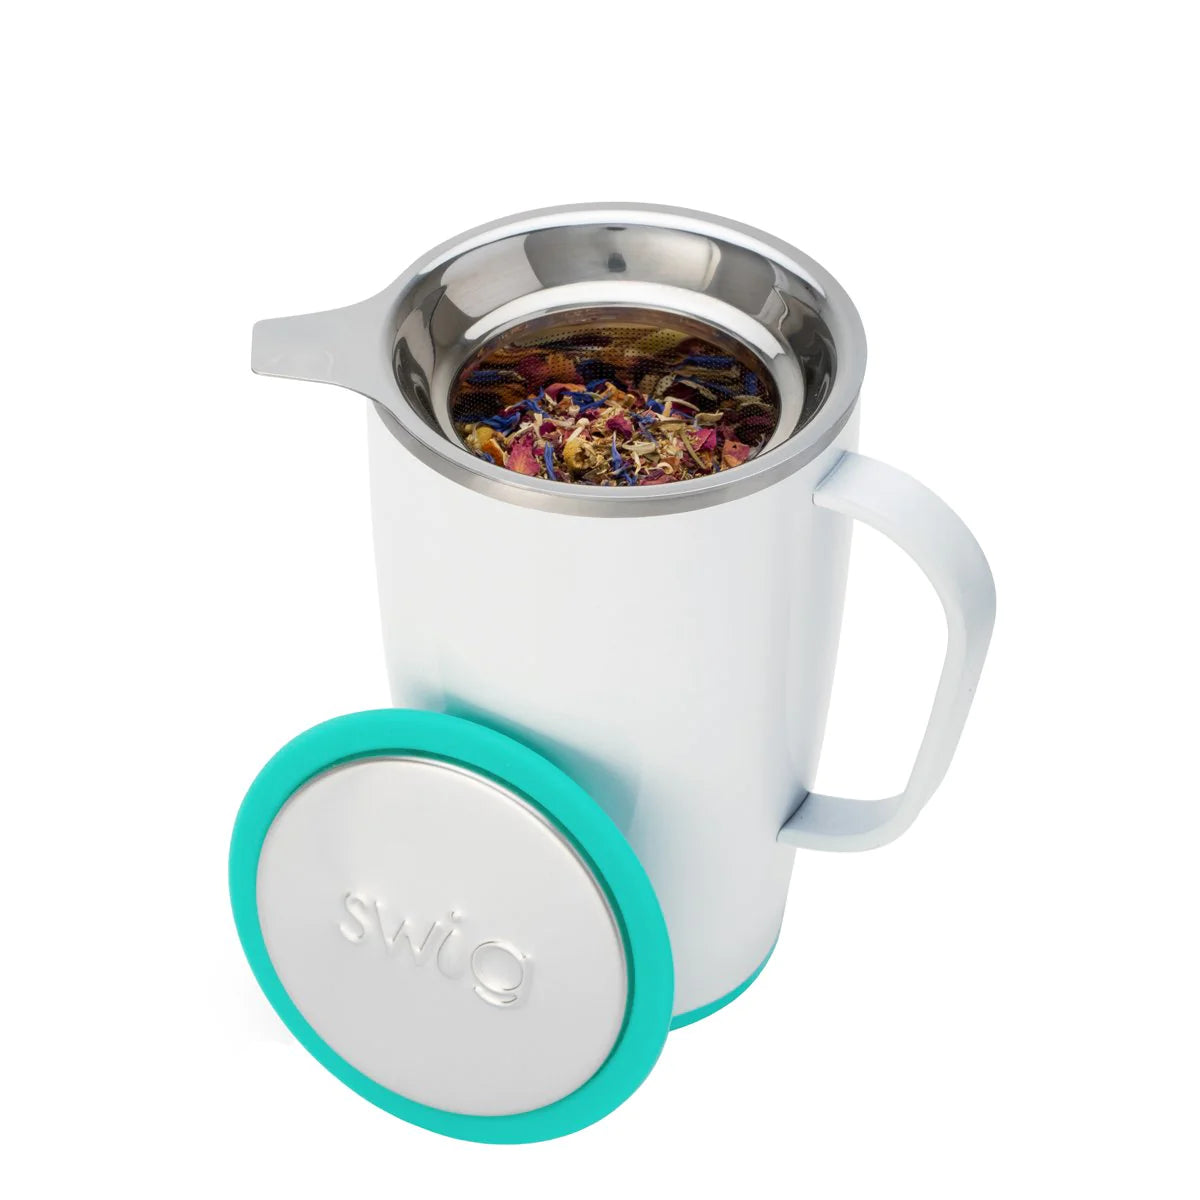 Stainless Steel Tea Infuser with Silicone Cover - Swig Life